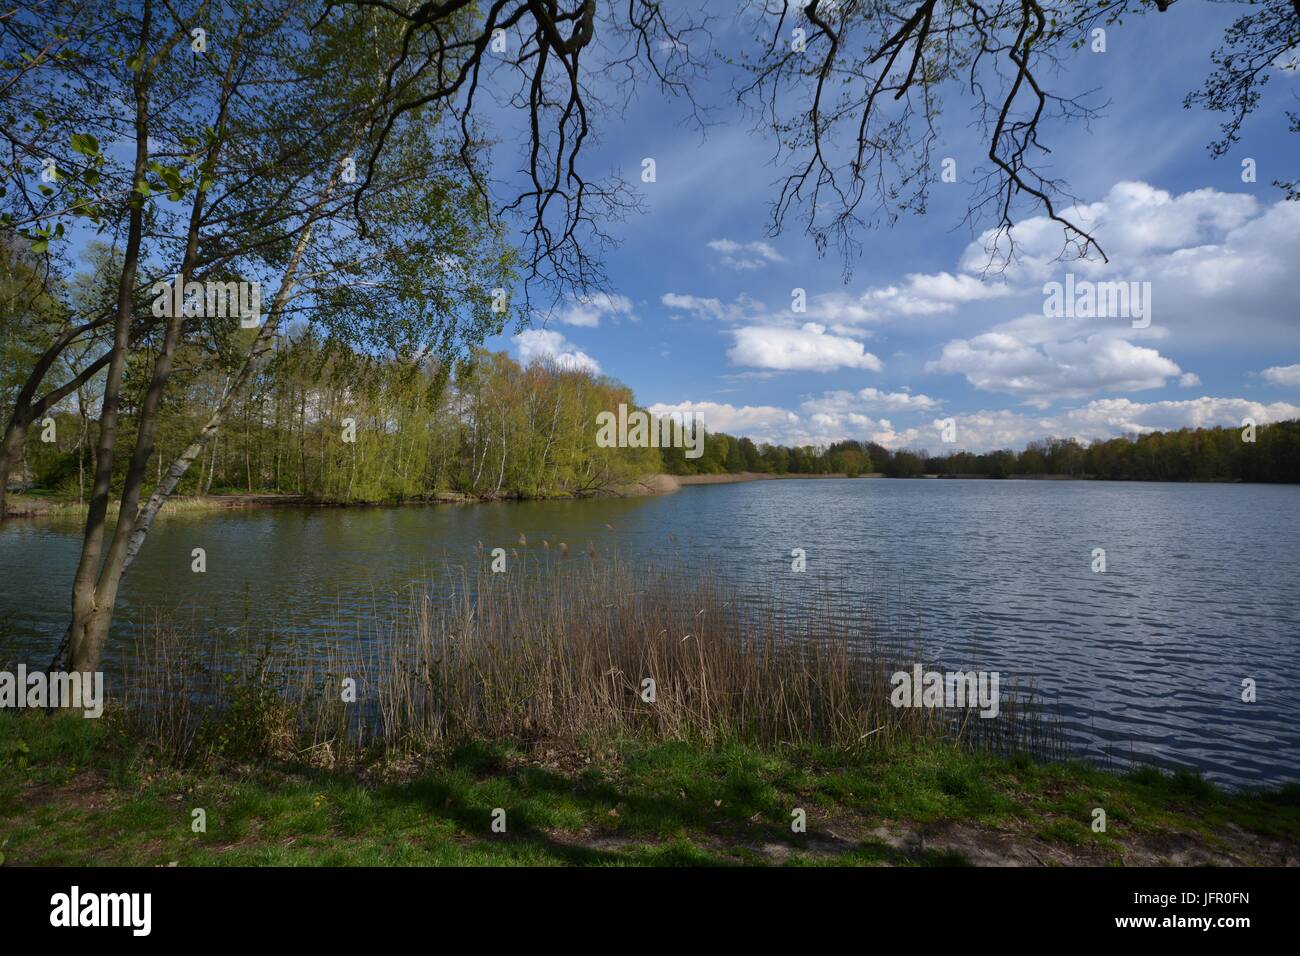 Impressions from New lake (Neuer See) in Falkensee (Brandenburg) from April 25, 2016, Germany Stock Photo